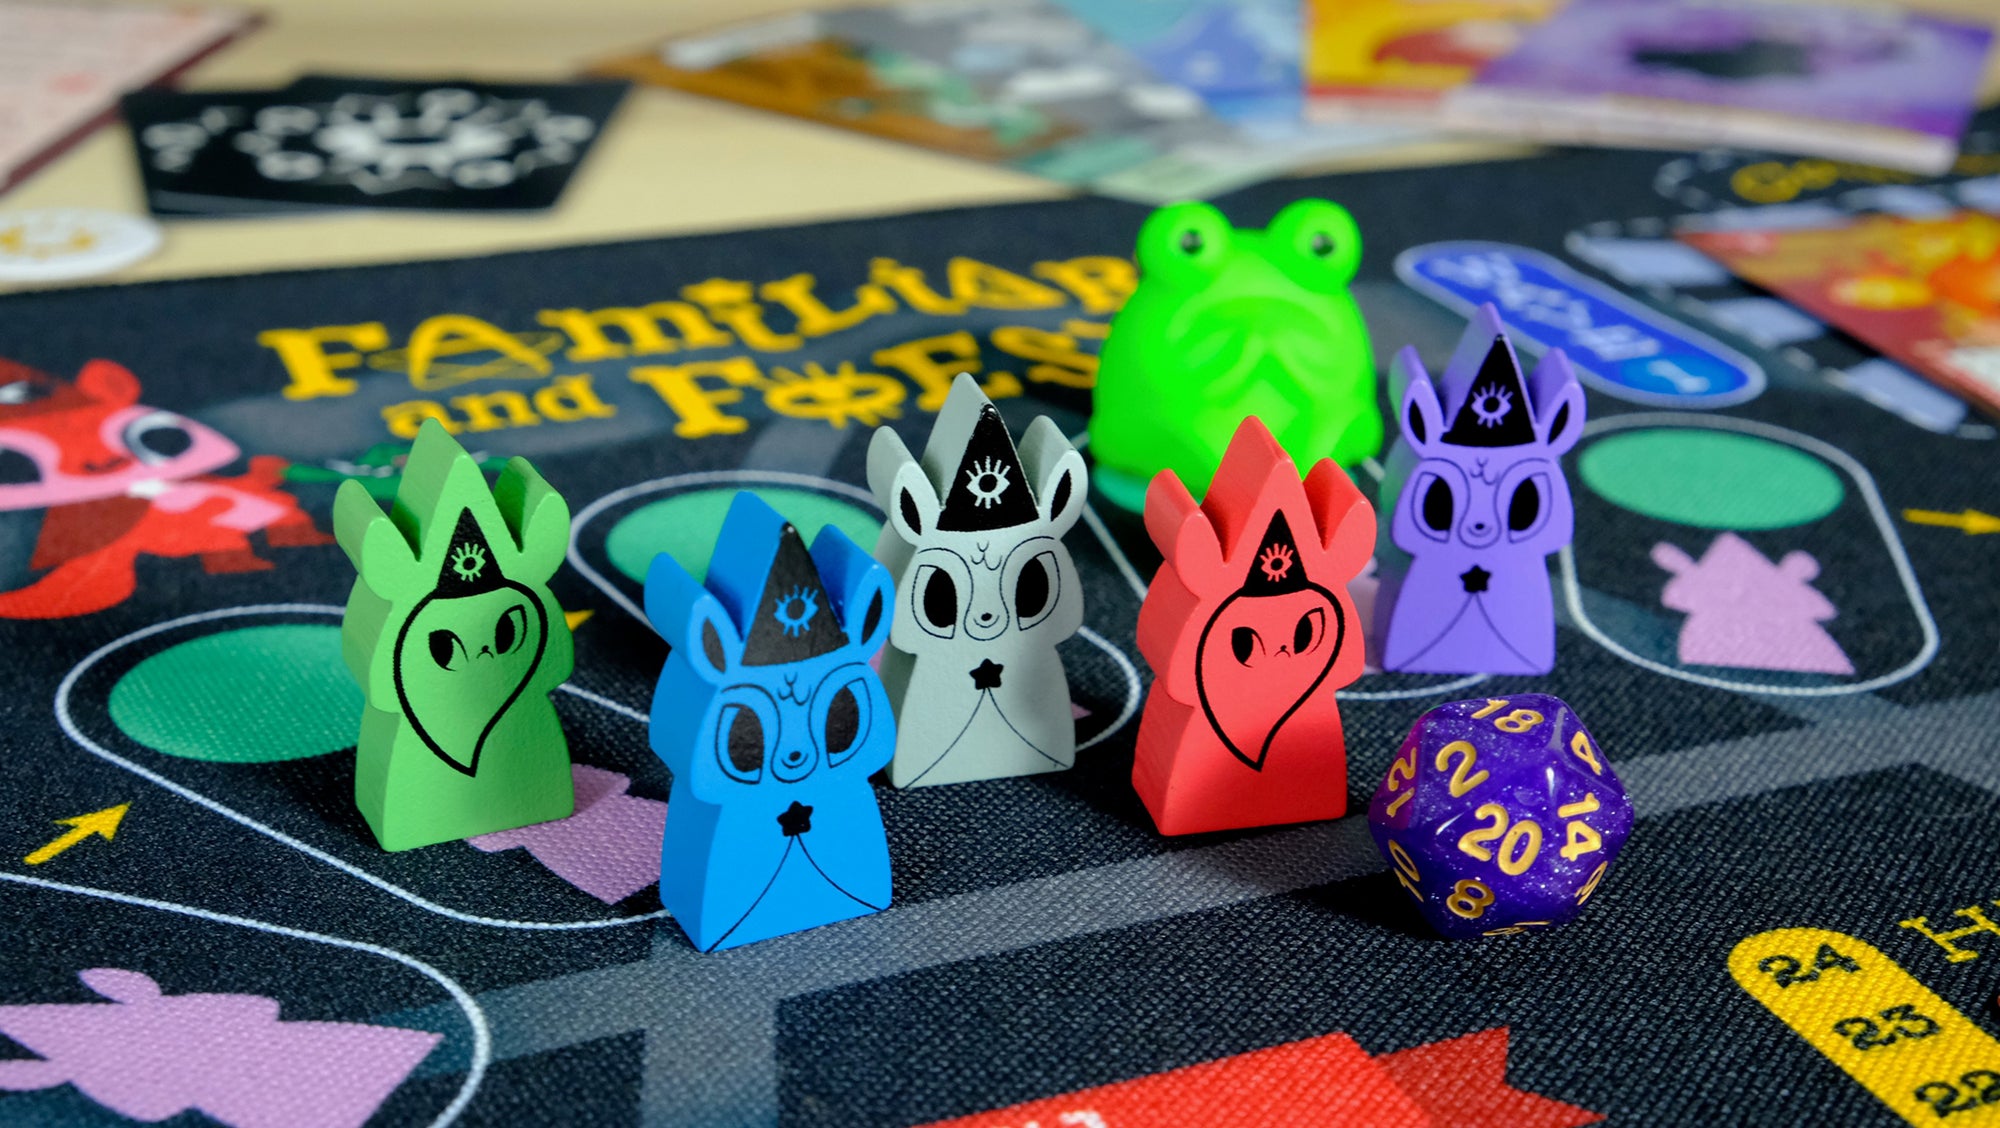 Horrible Adorables Familiars and Foes: A Spellbinding Cooperative Board Game - Game Components